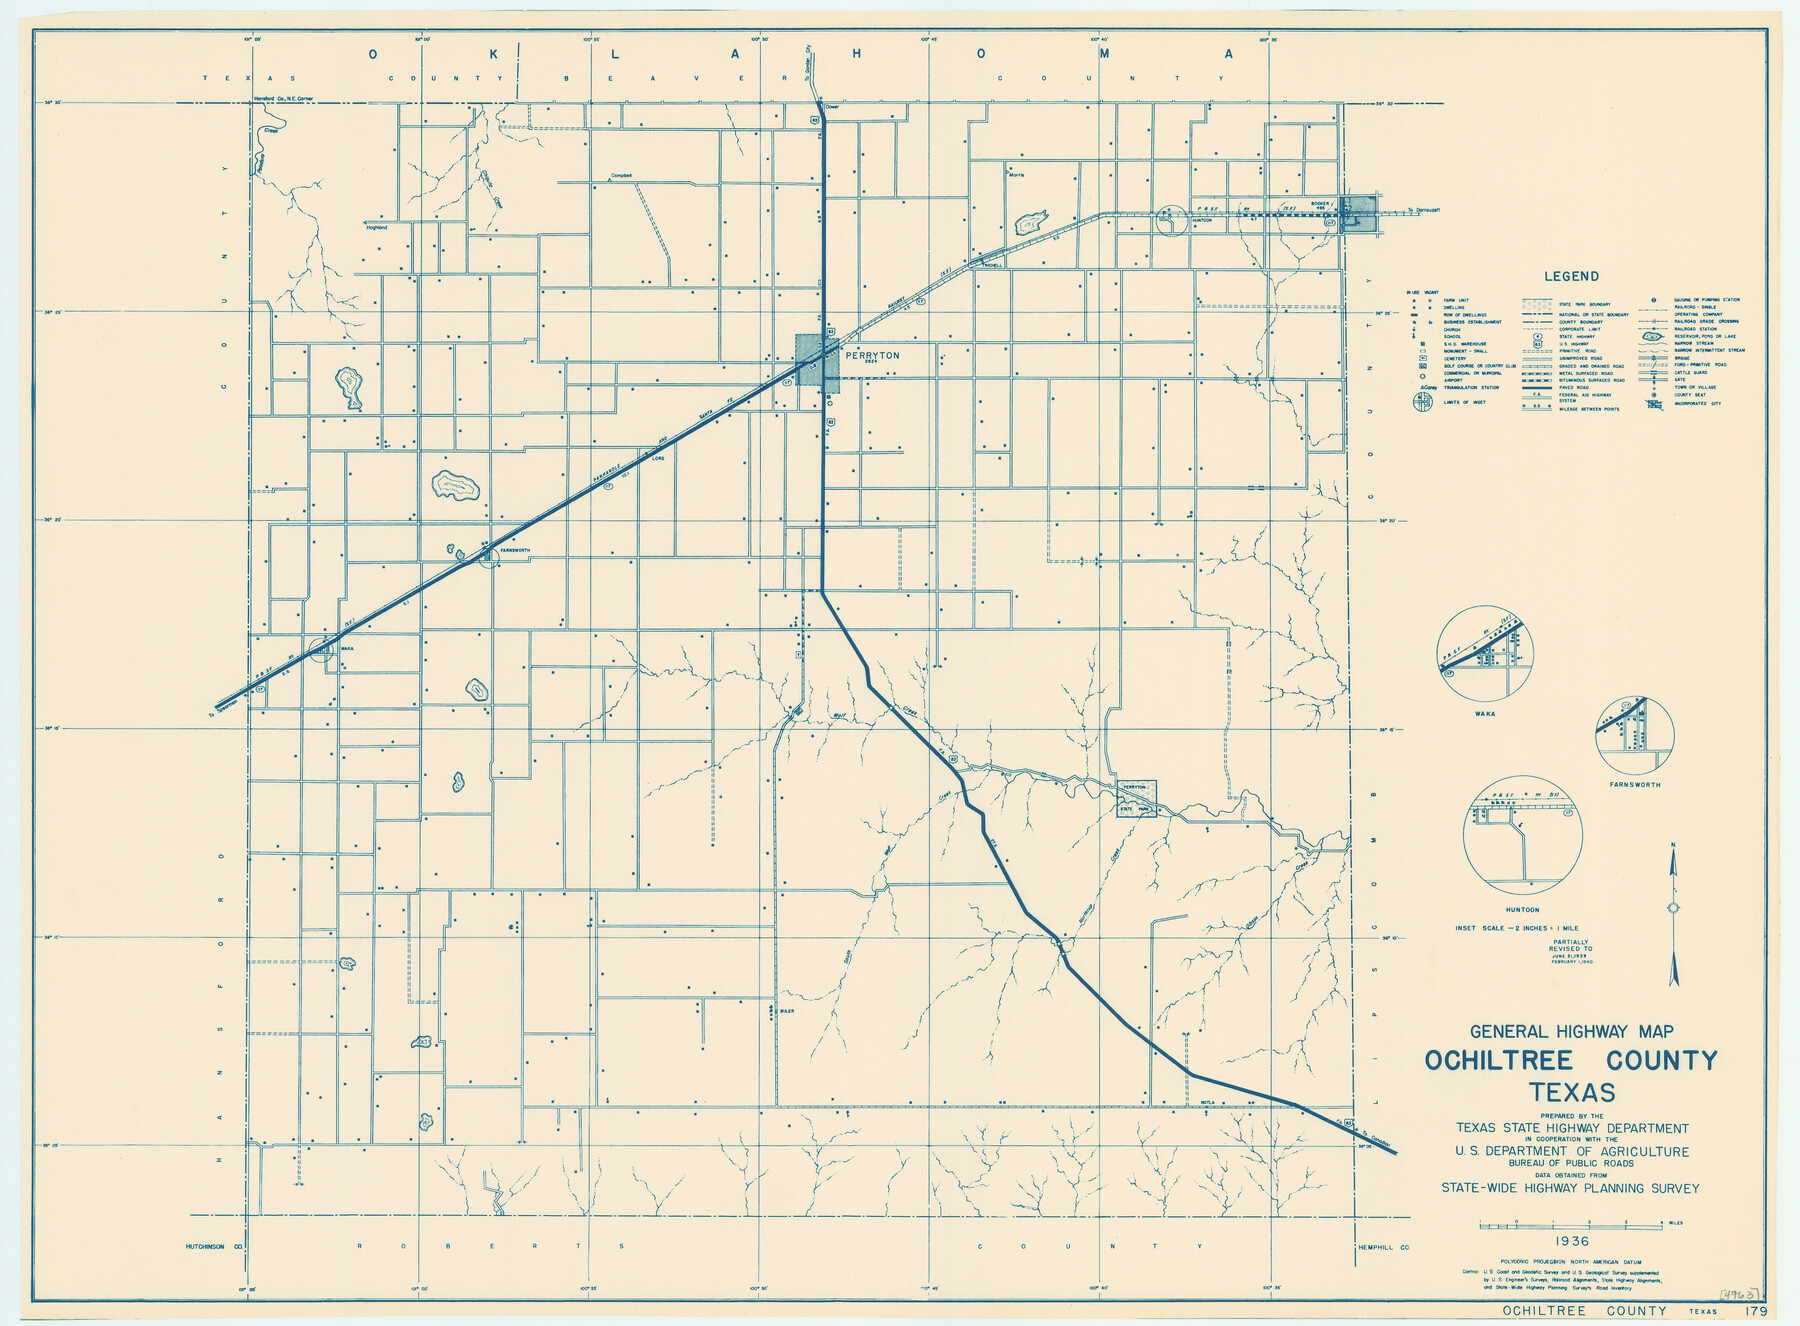 79211, General Highway Map, Ochiltree County, Texas, Texas State Library and Archives